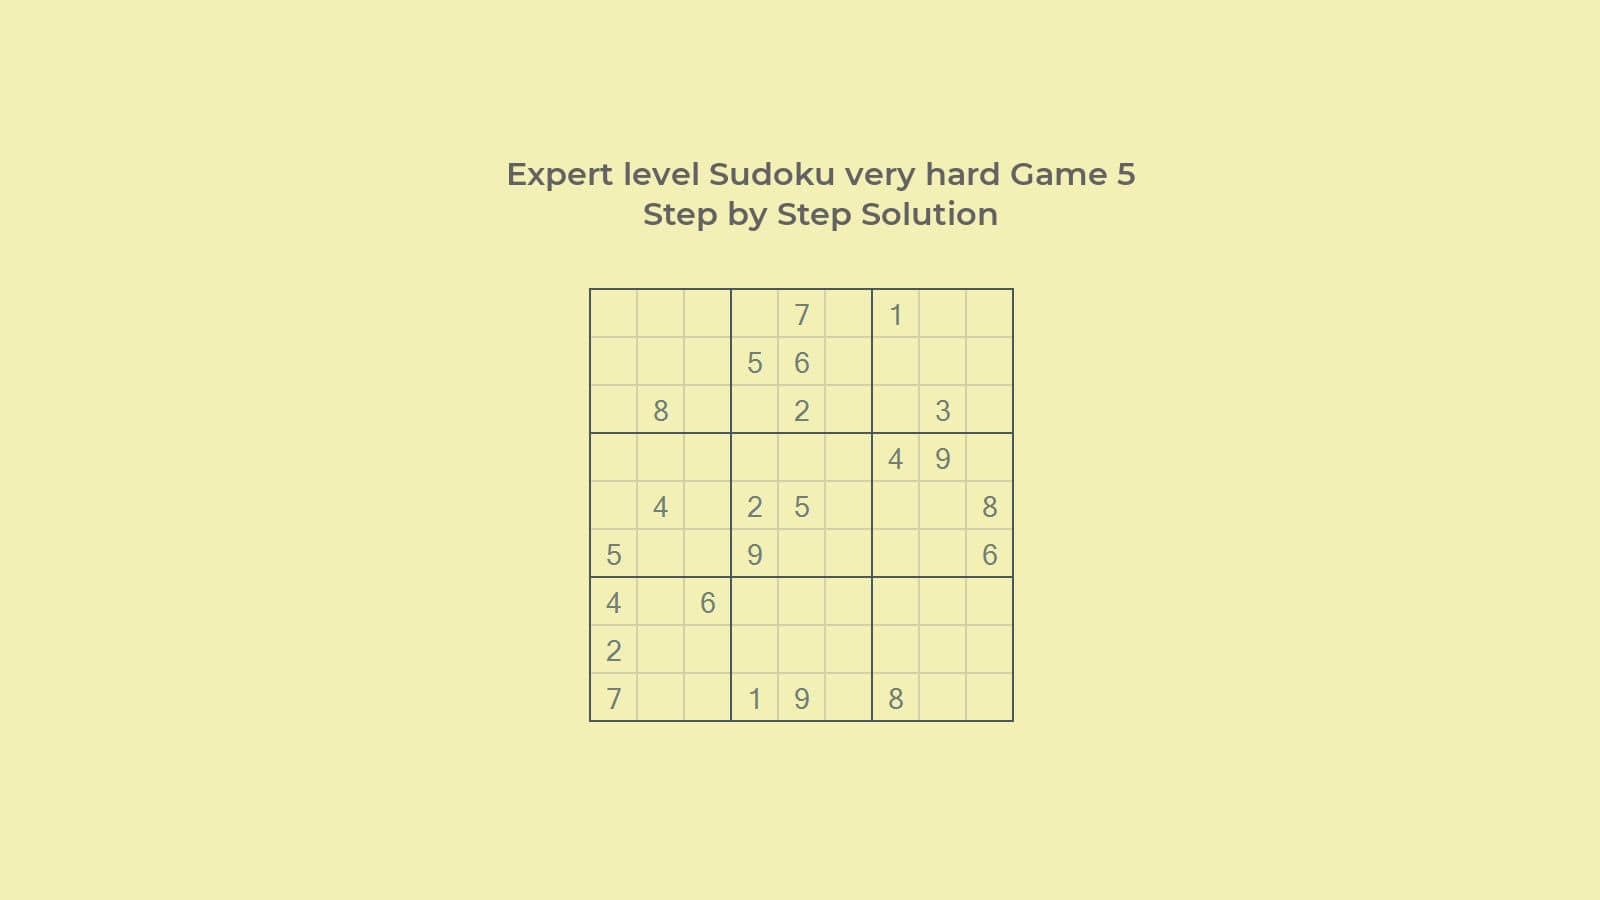 How to Solve Expert Sudoku Level 5 Game 5